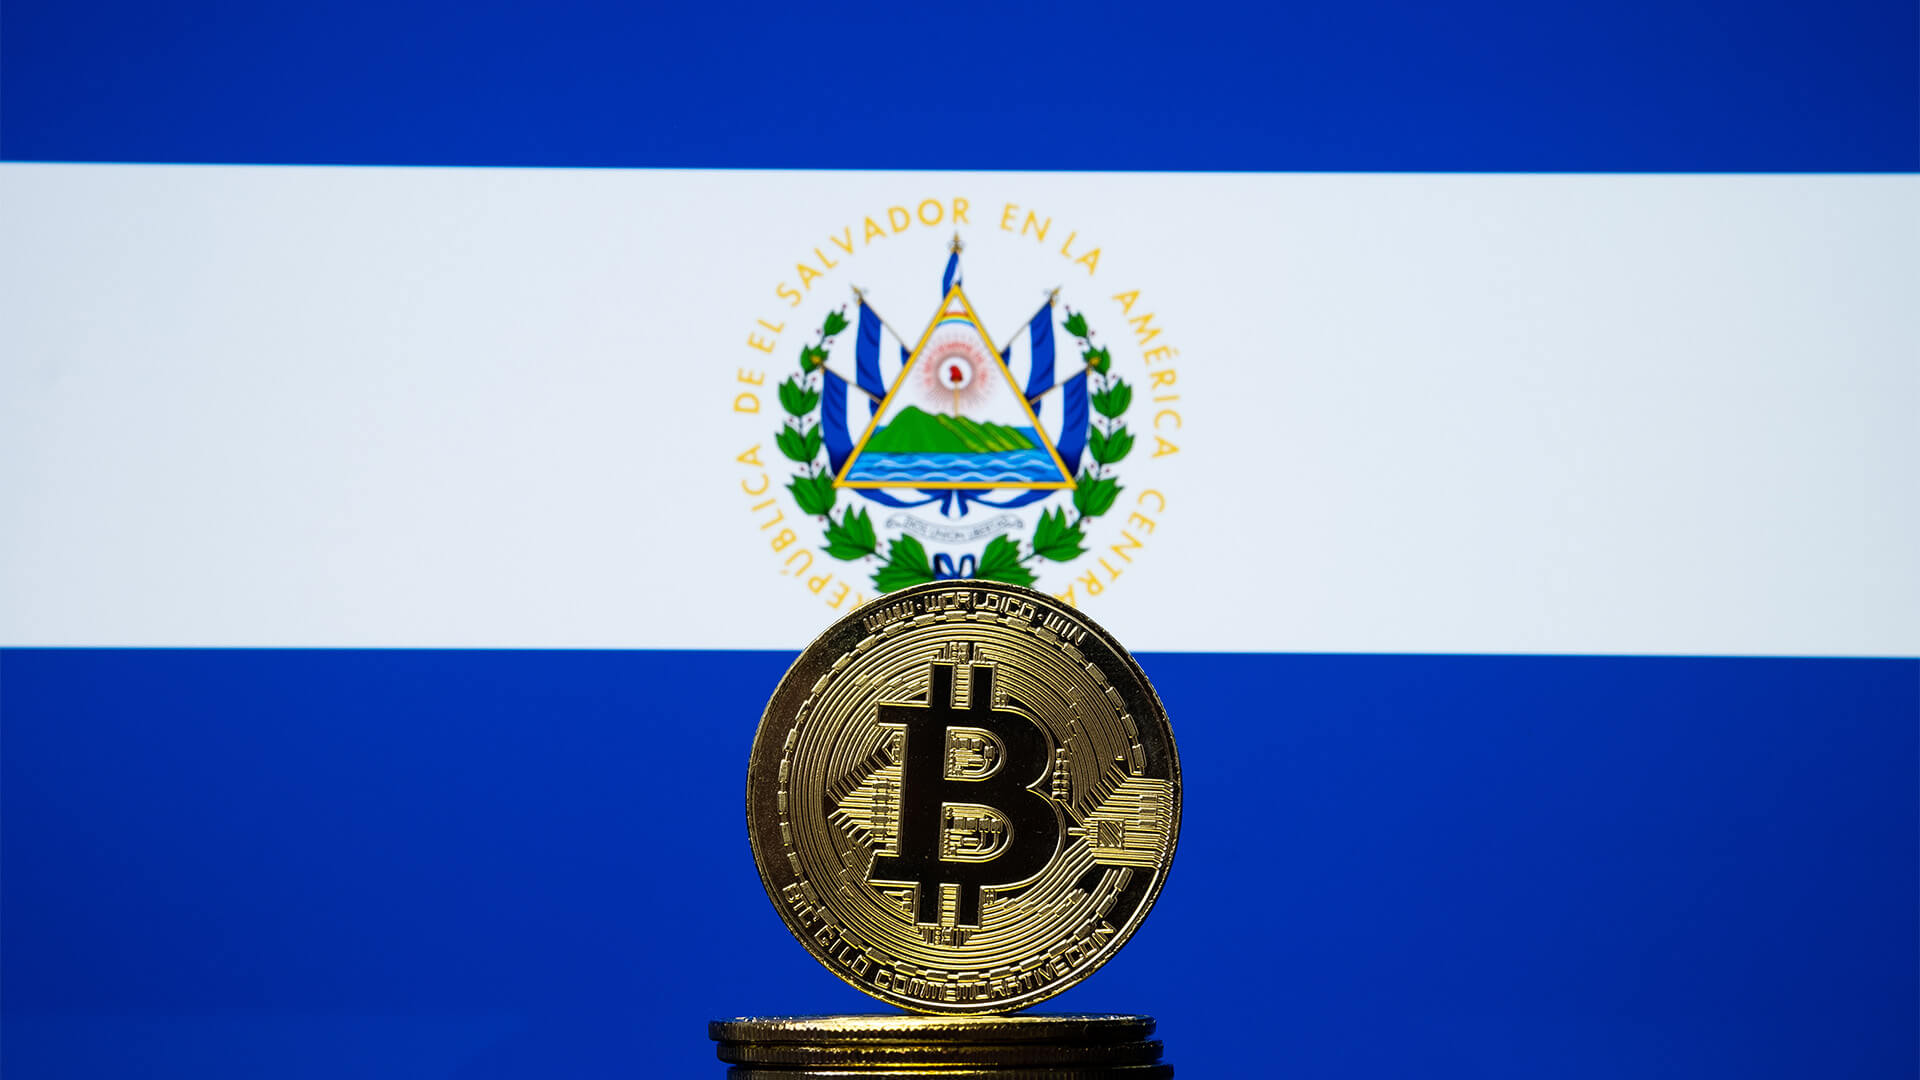 Bitcoins stacked in front of the El Salvador flag